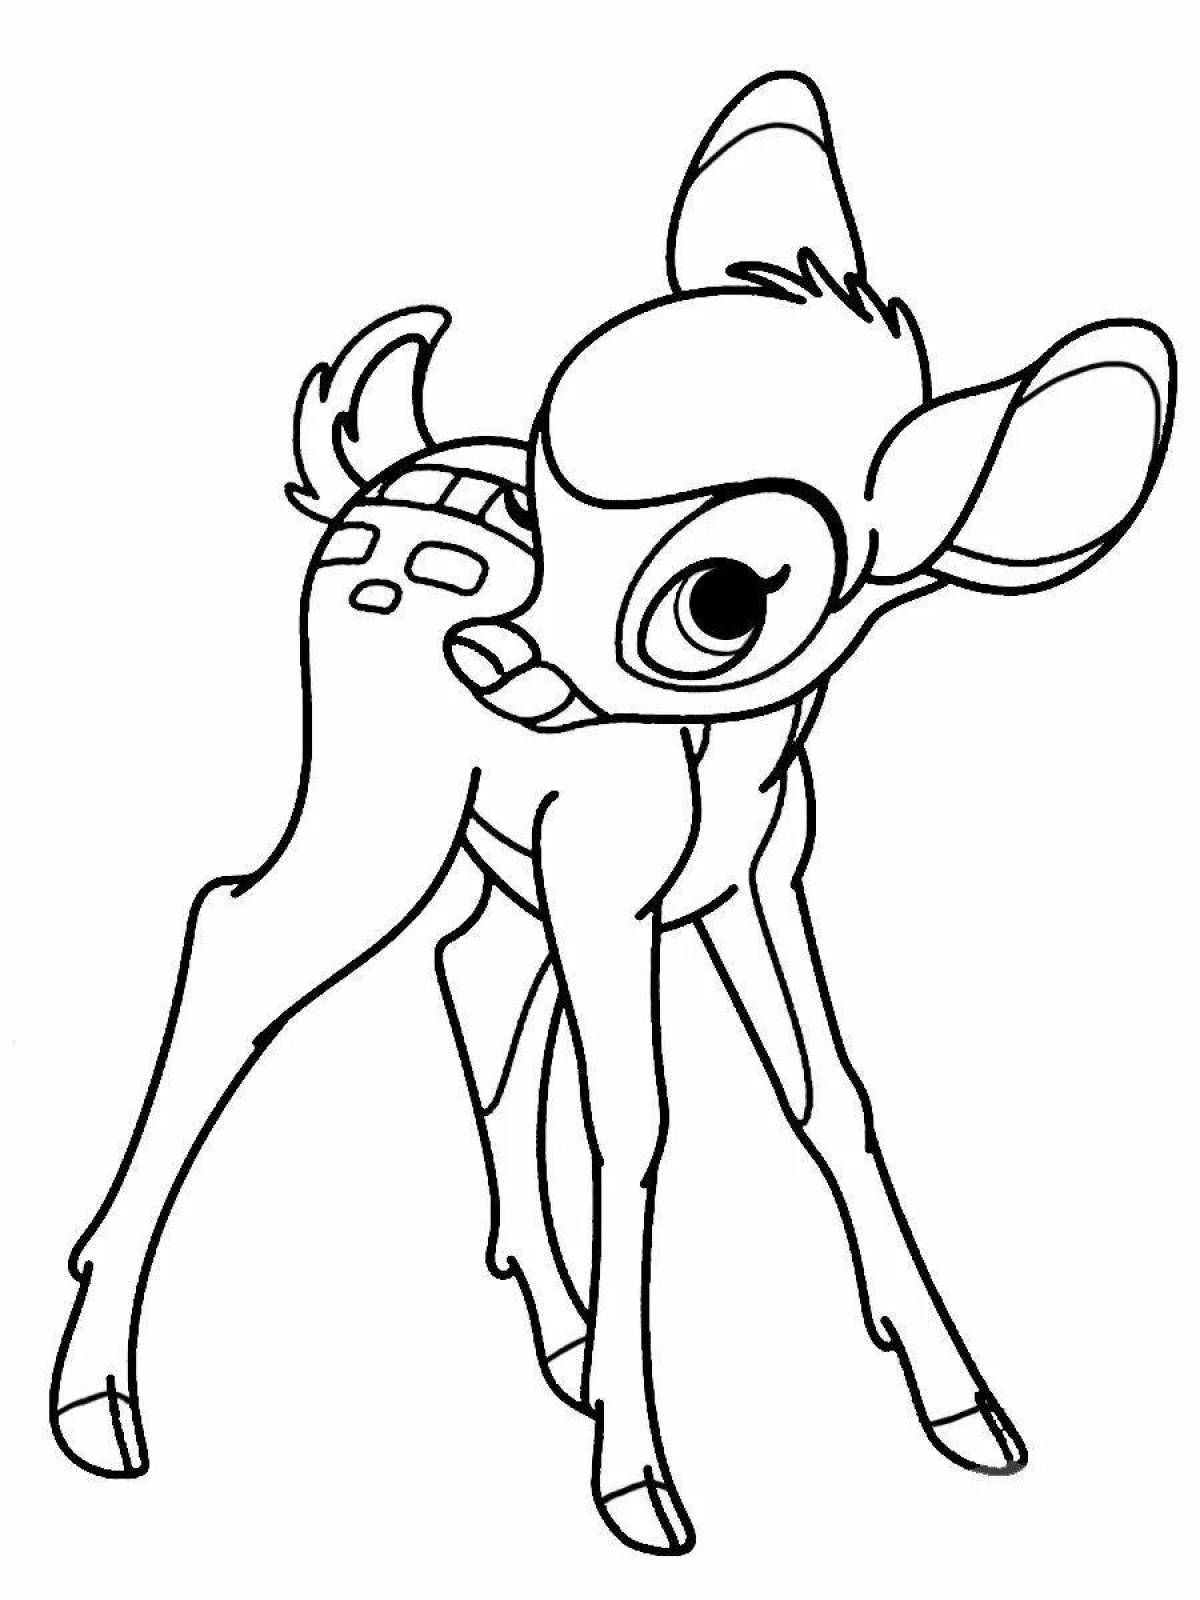 Playtime bambi fawn coloring page